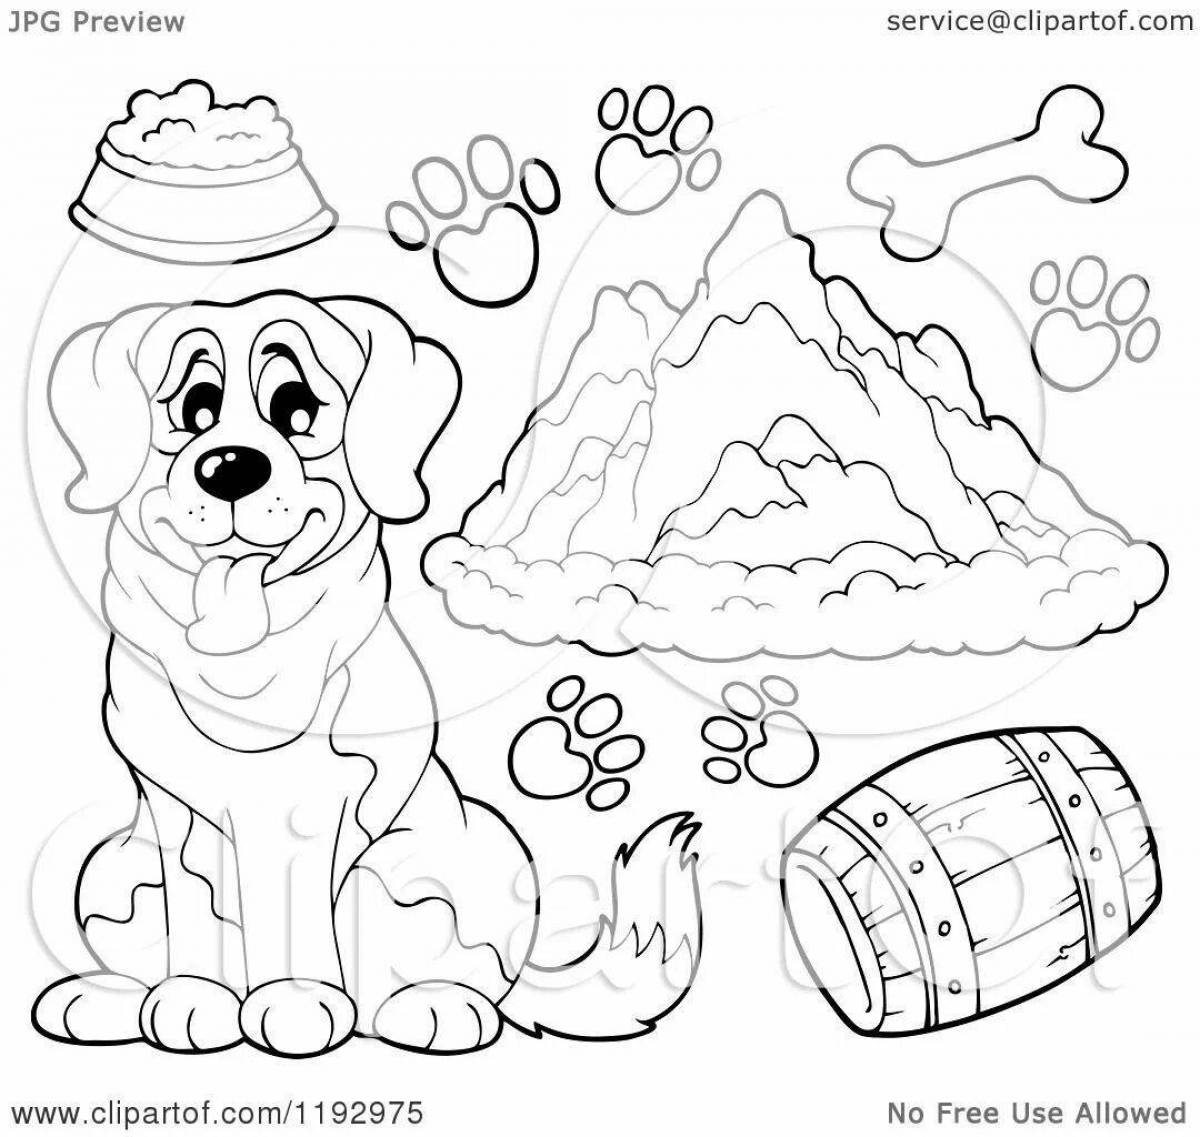 Great St. Bernard coloring page